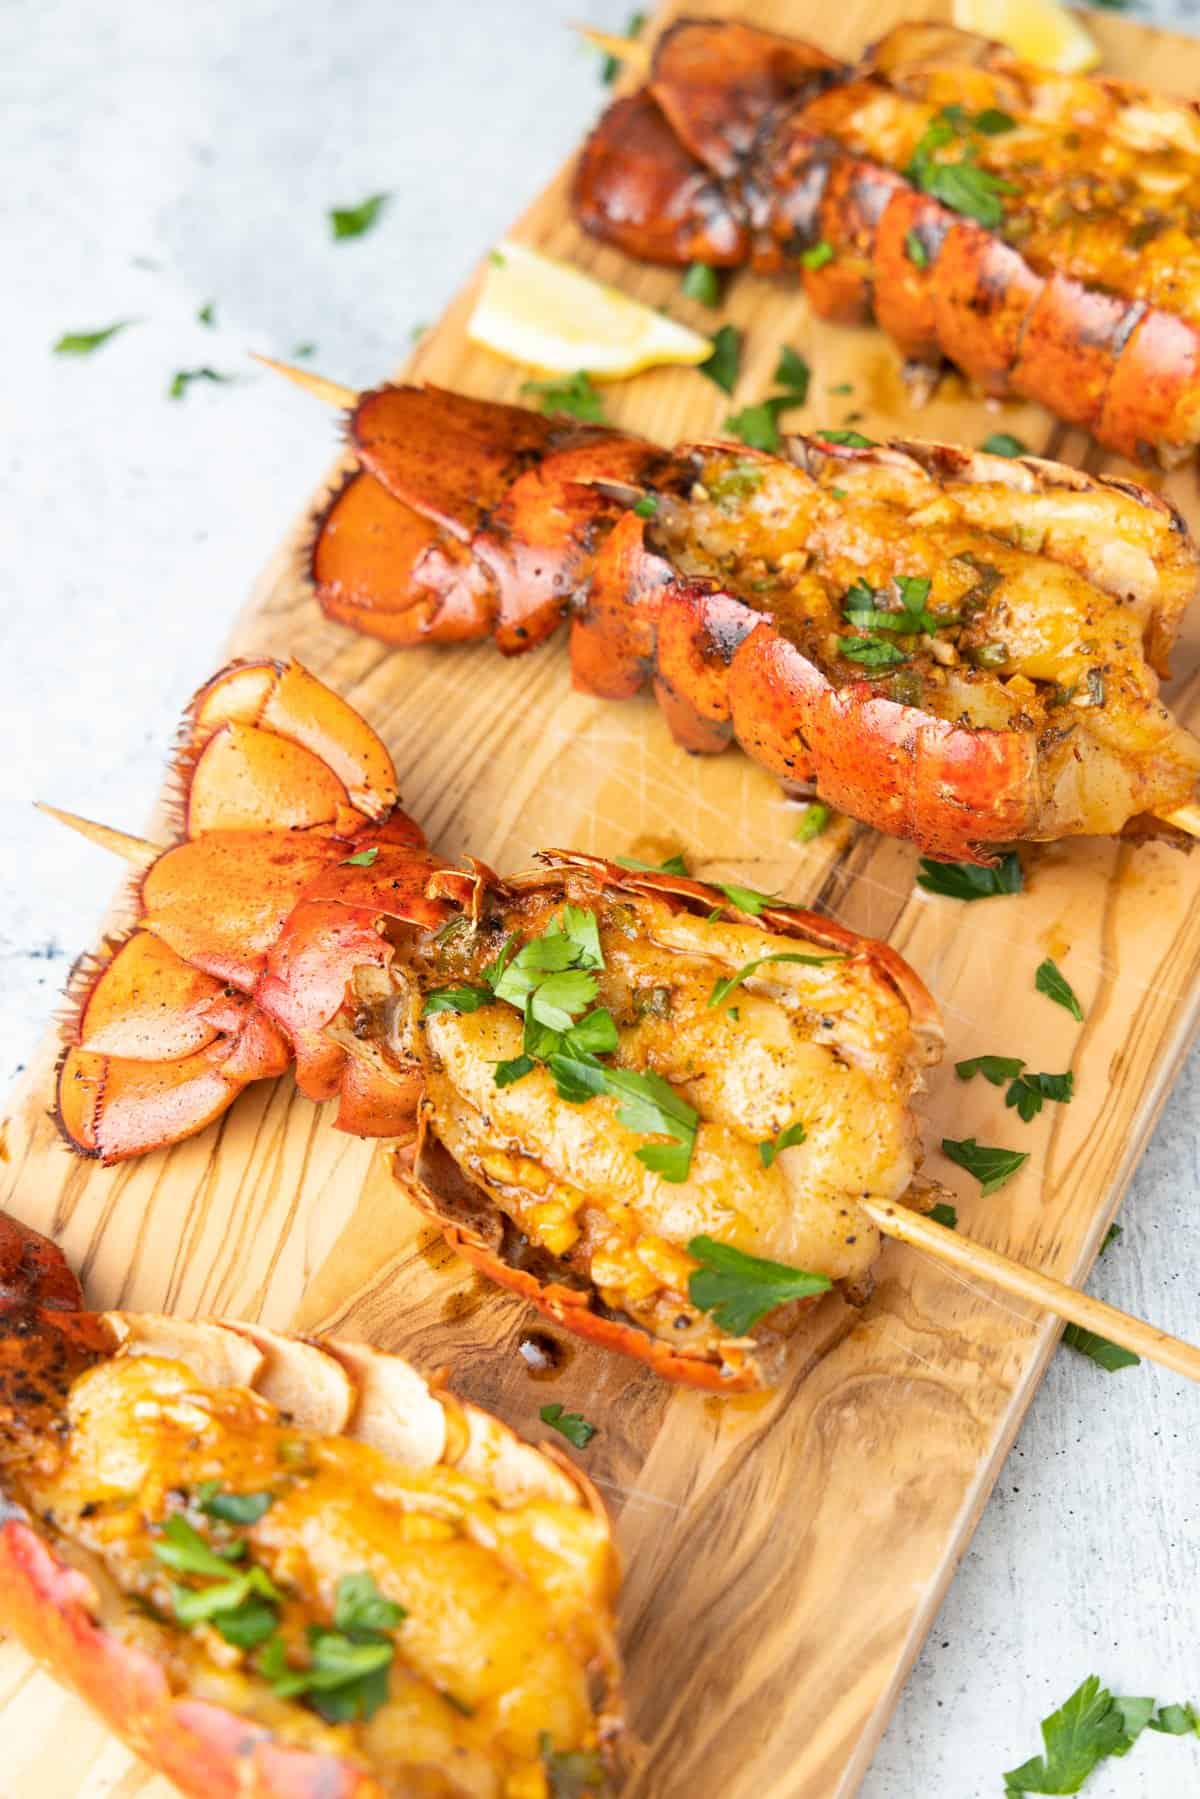 Lobster tails on cutting board seasoned with parsley